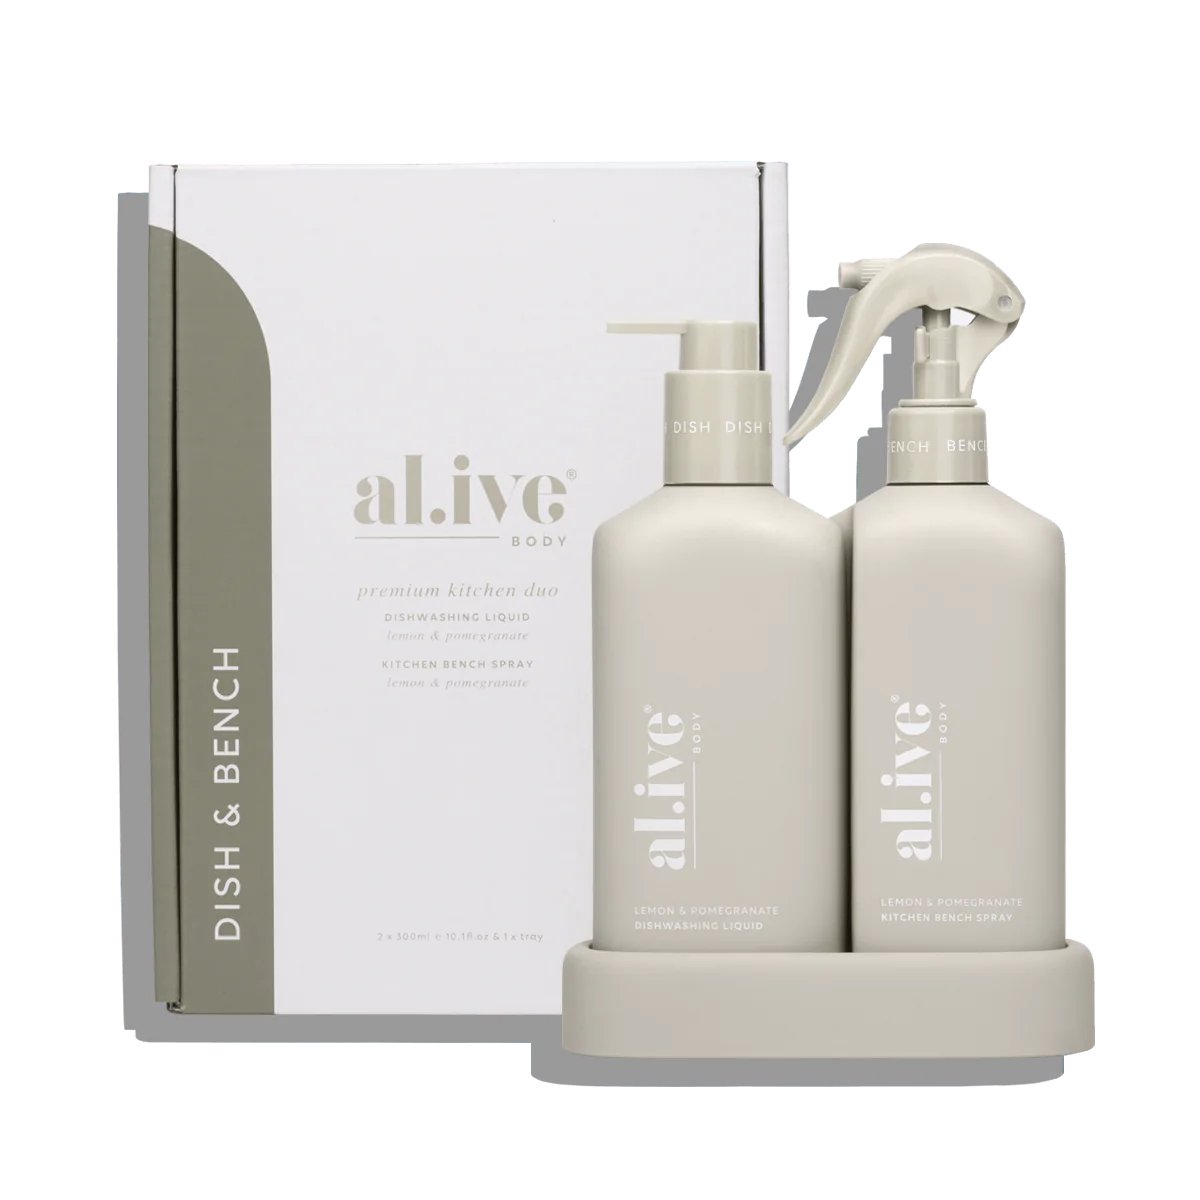 AlivecBody Dishwashing Liquid & Bench Spray | Kitchen | cleaning Products | the ivy plant studio 